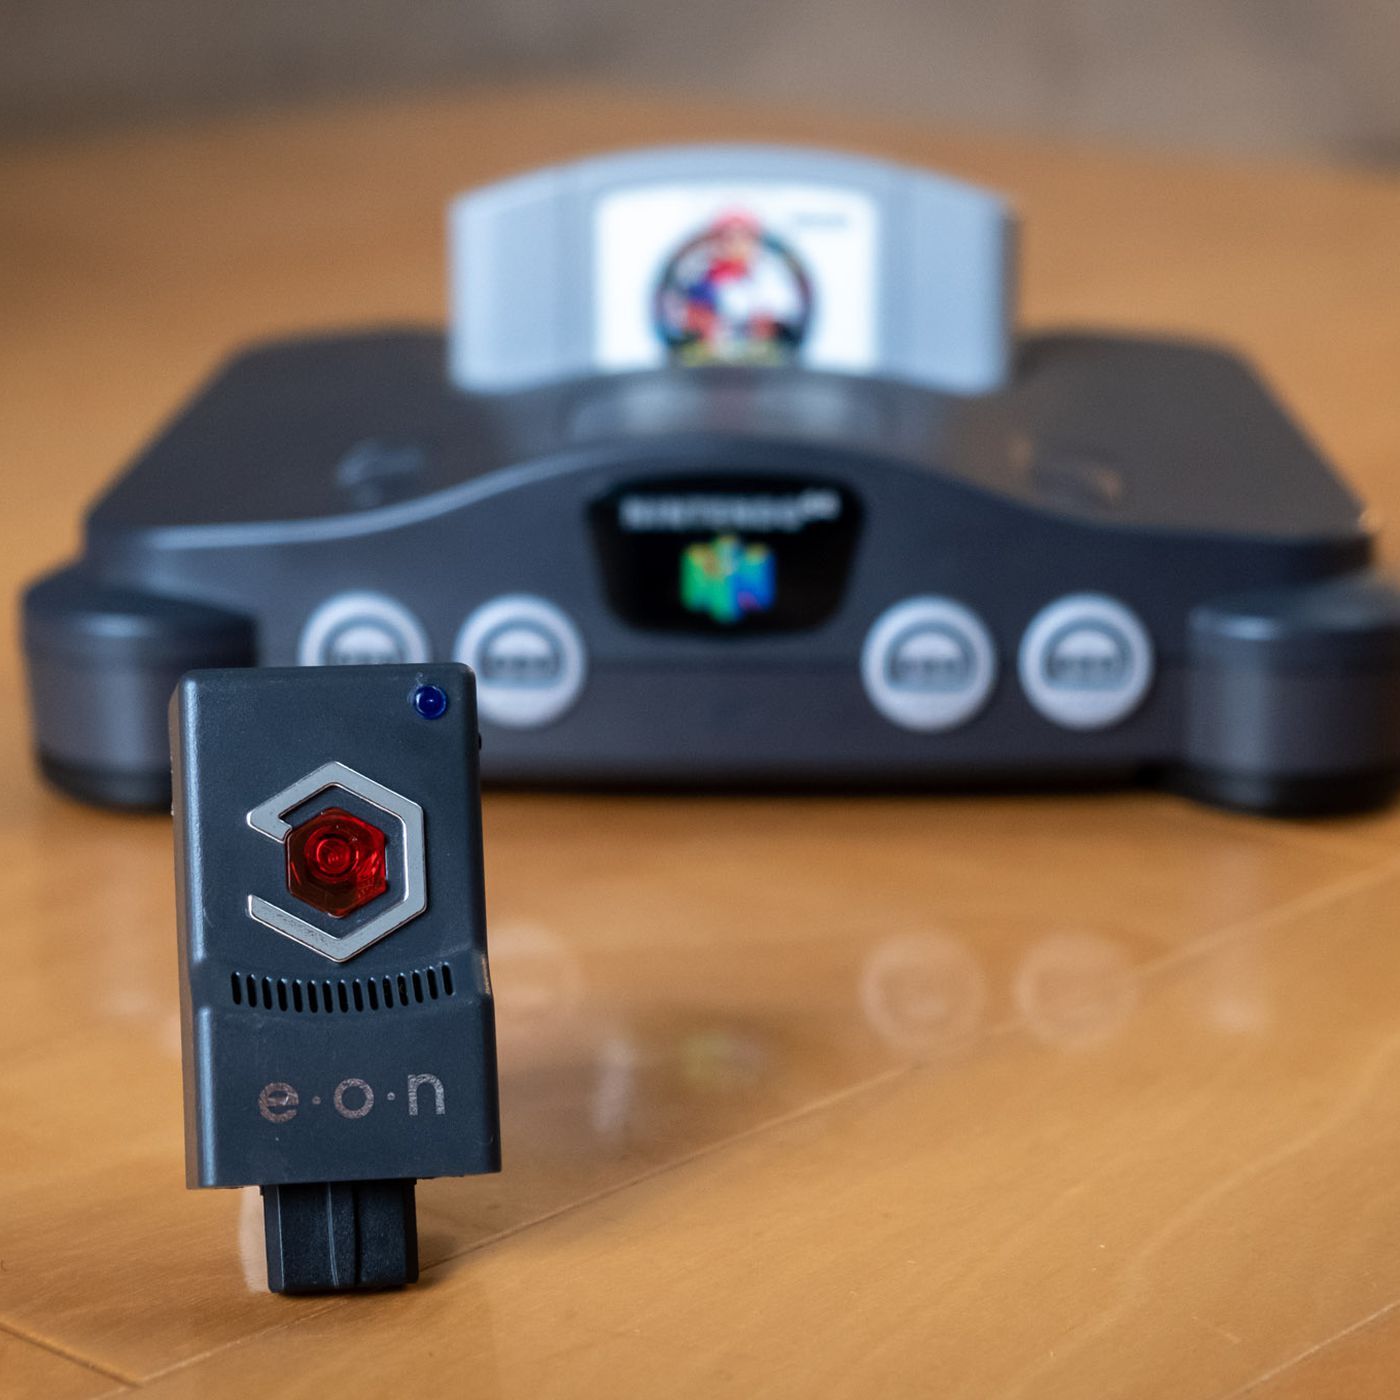 This expensive adapter makes the Nintendo 64 look good on modern TVs